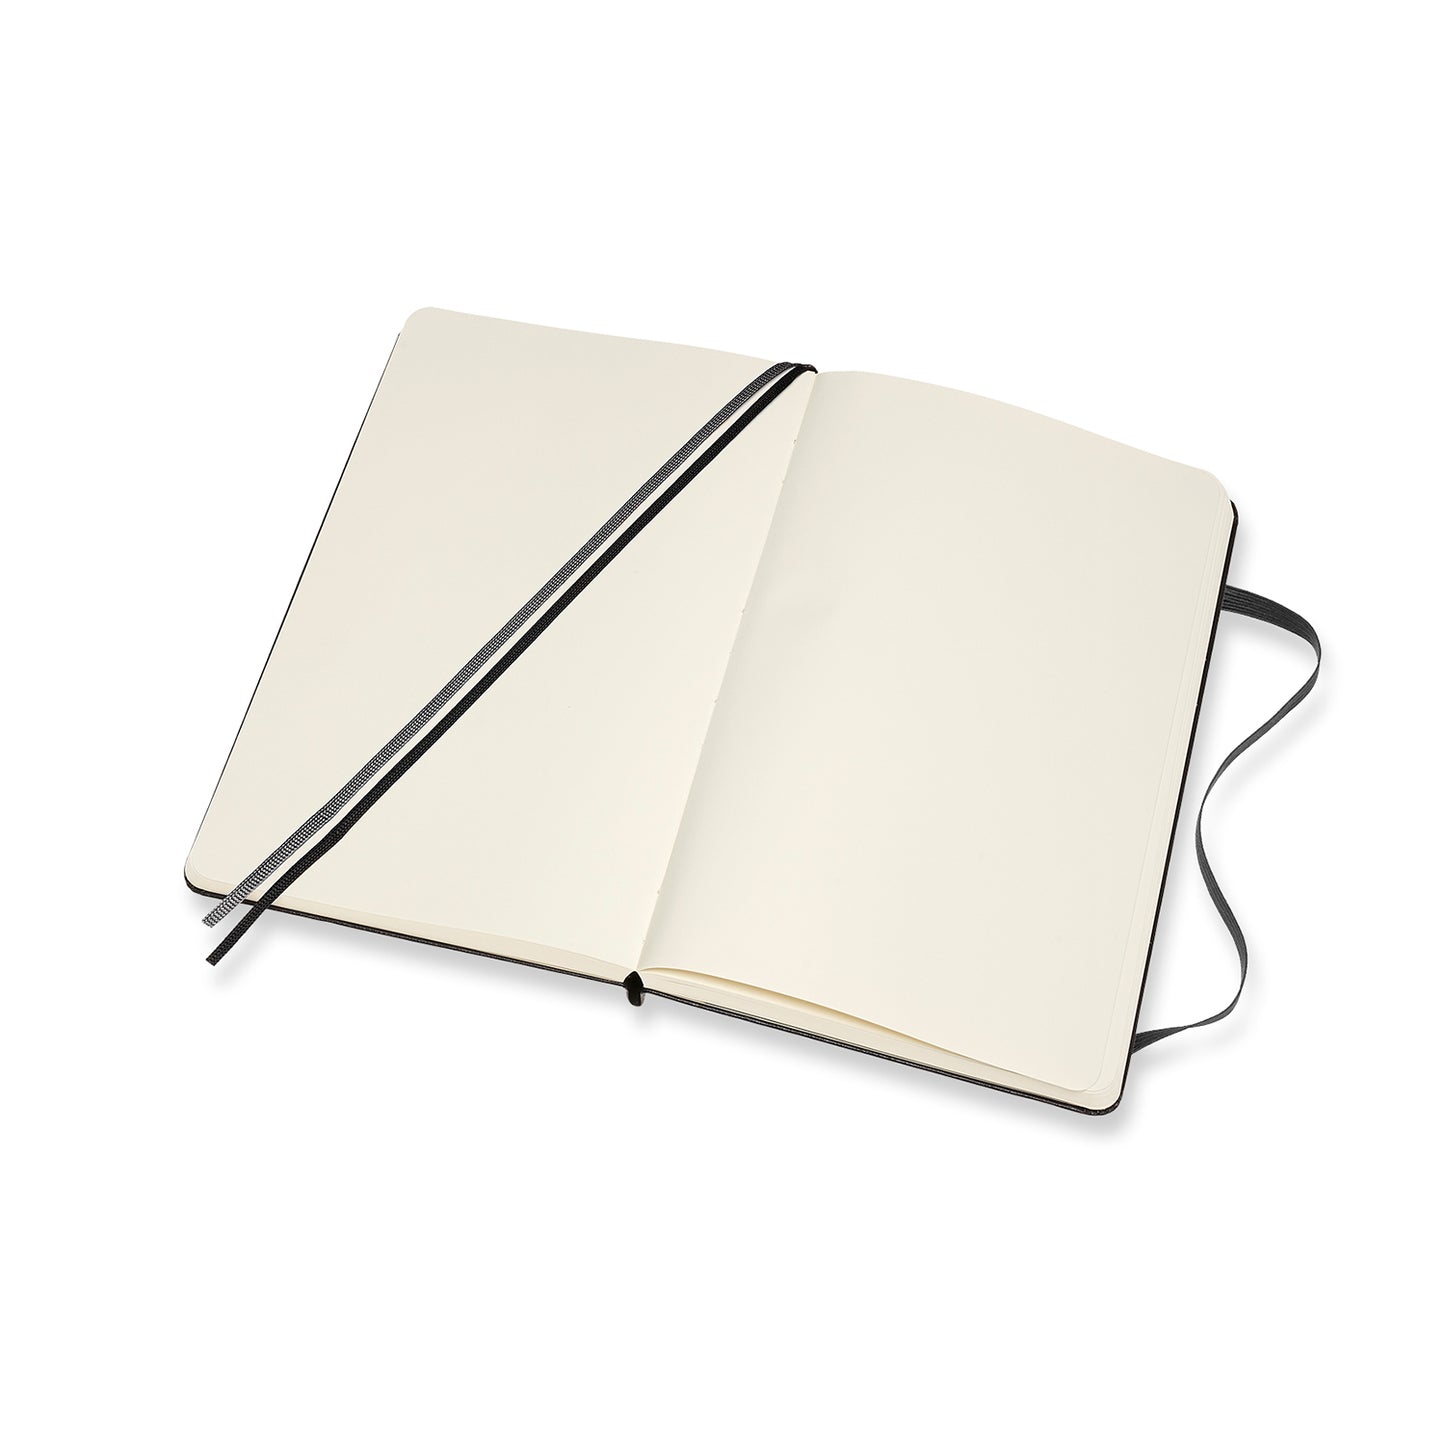 Beige Classic Notebook - Expanded Version - Black Softcover / Dotted / Large,Softcover / Plain / Large,Softcover / Ruled / Large,Softcover / Squared / Large,Hardcover / Dotted / Large,Hardcover / Plain / Large,Hardcover / Ruled / Large,Hardcover / Squared / Large Moleskine